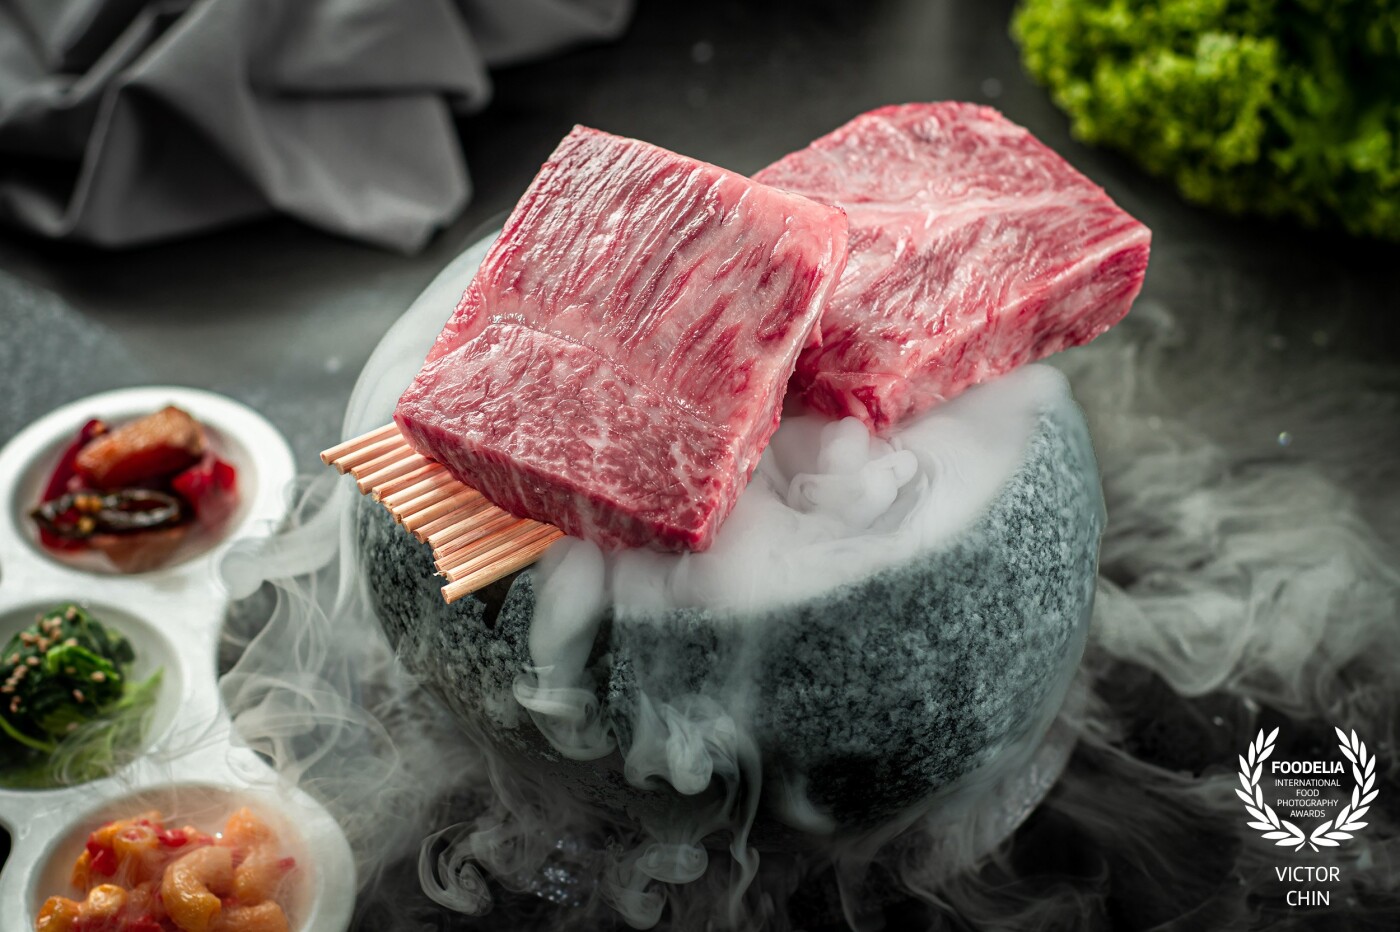 Premium Wagyu Beef for a Korean BBQ menu. The idea is to feature this item in the menu in a more premium way. Dark mood is selected for this shot as darker pictures always give a more premium feeling.